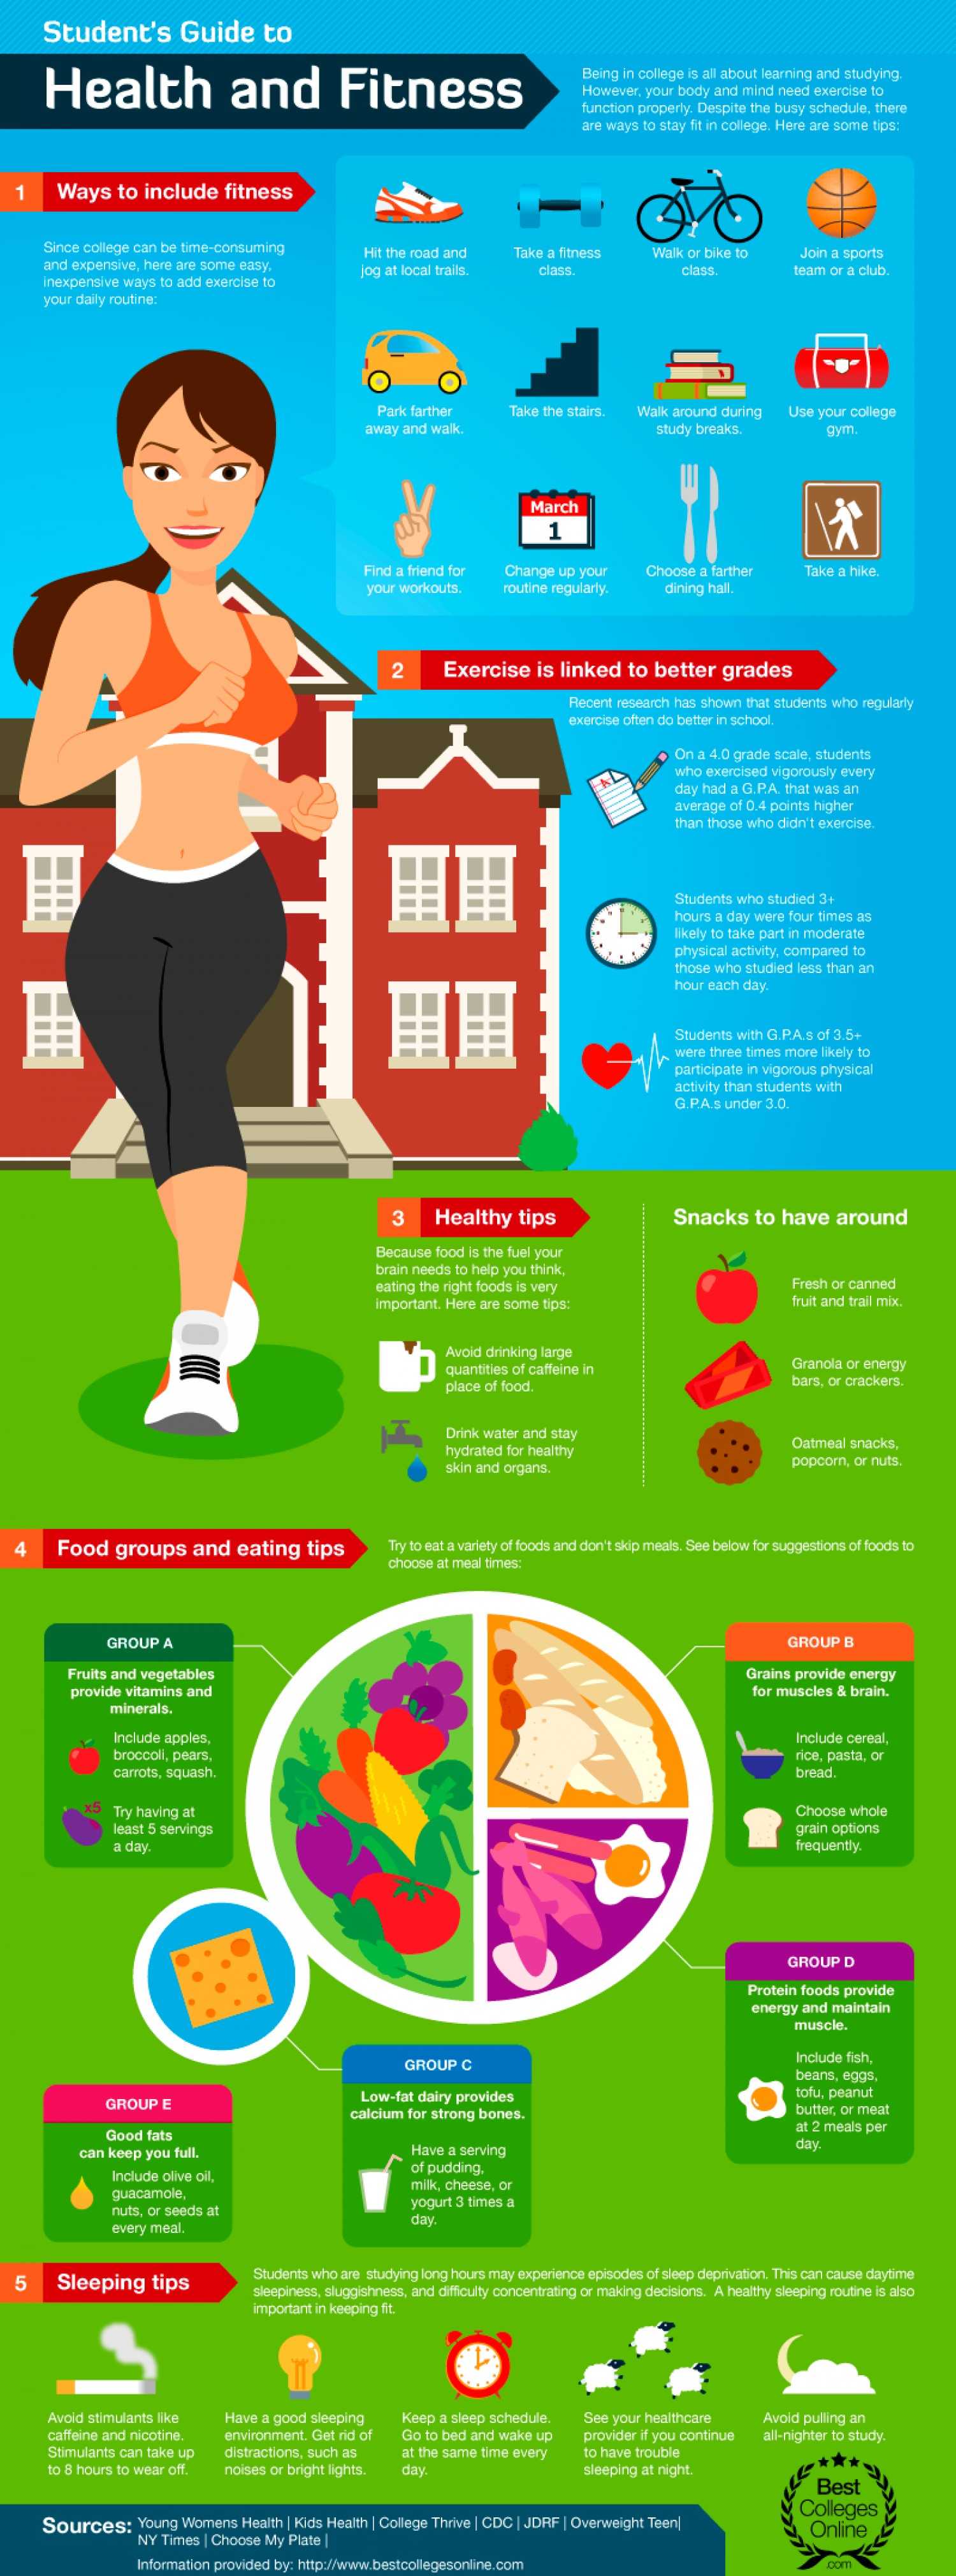 Student's Guide To Health And Fitness